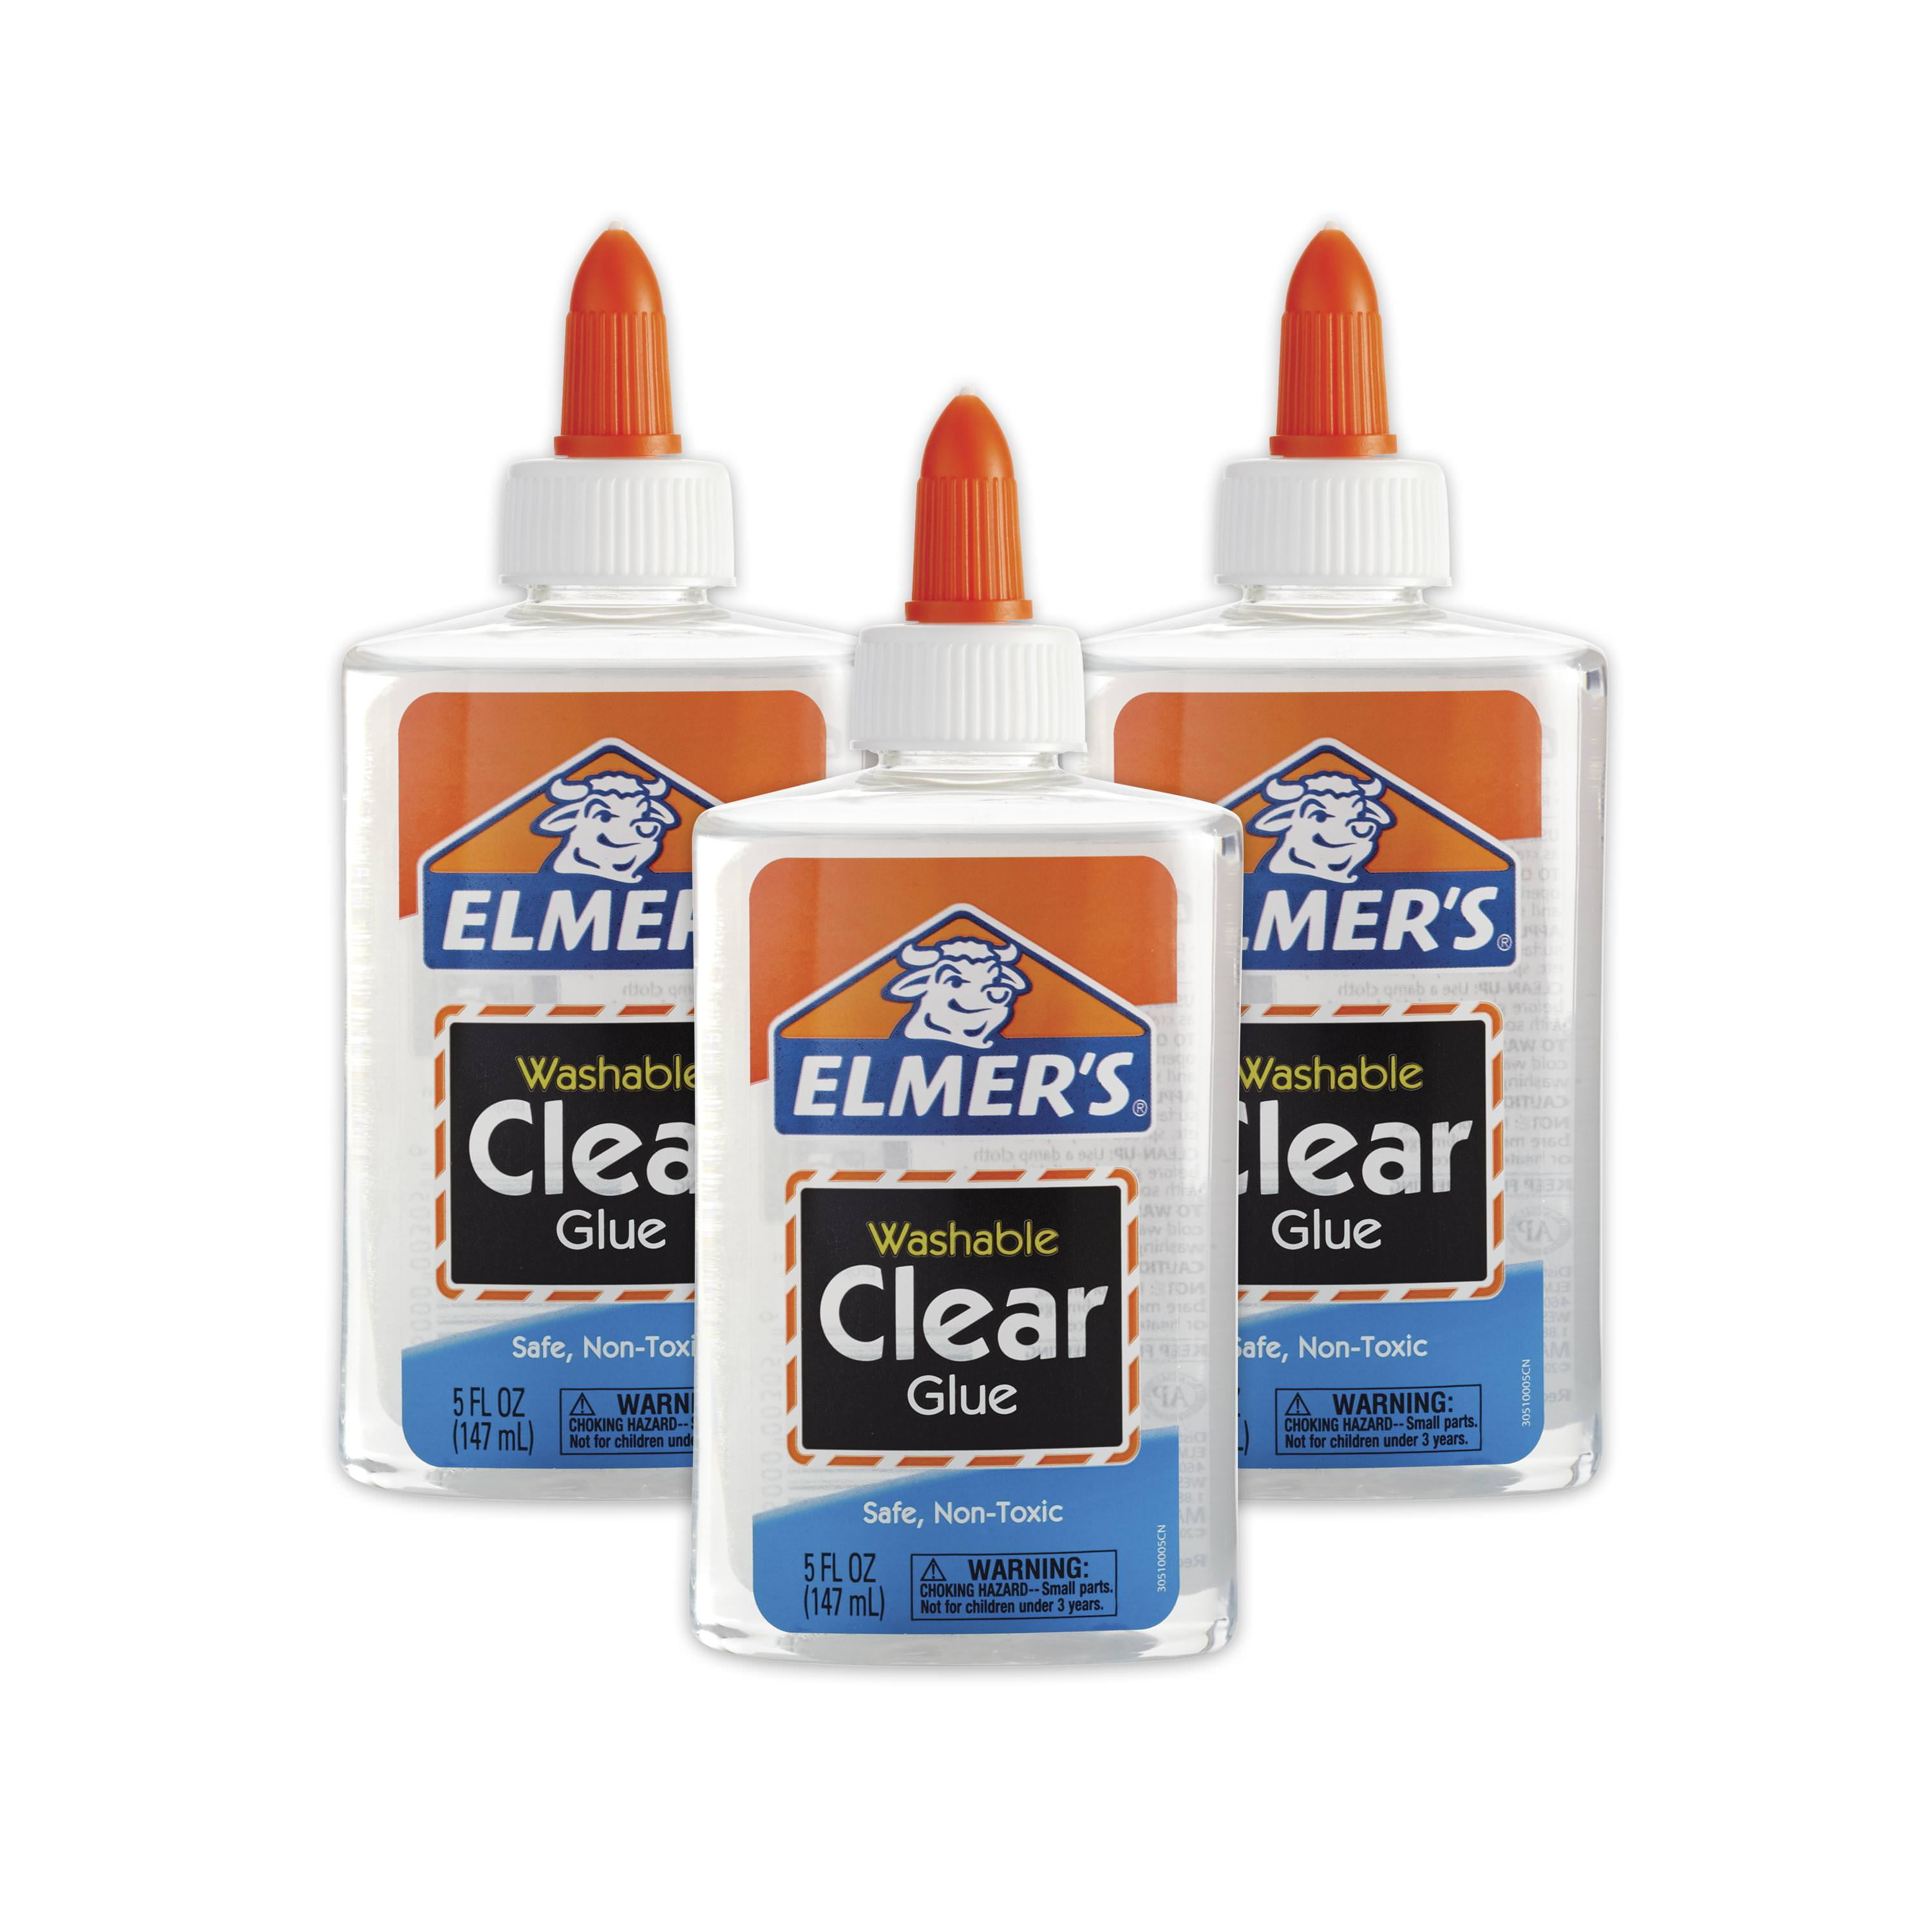  Elmer's Liquid School Glue, Clear, Washable, 9 Ounces, 1 Count  : Office Products